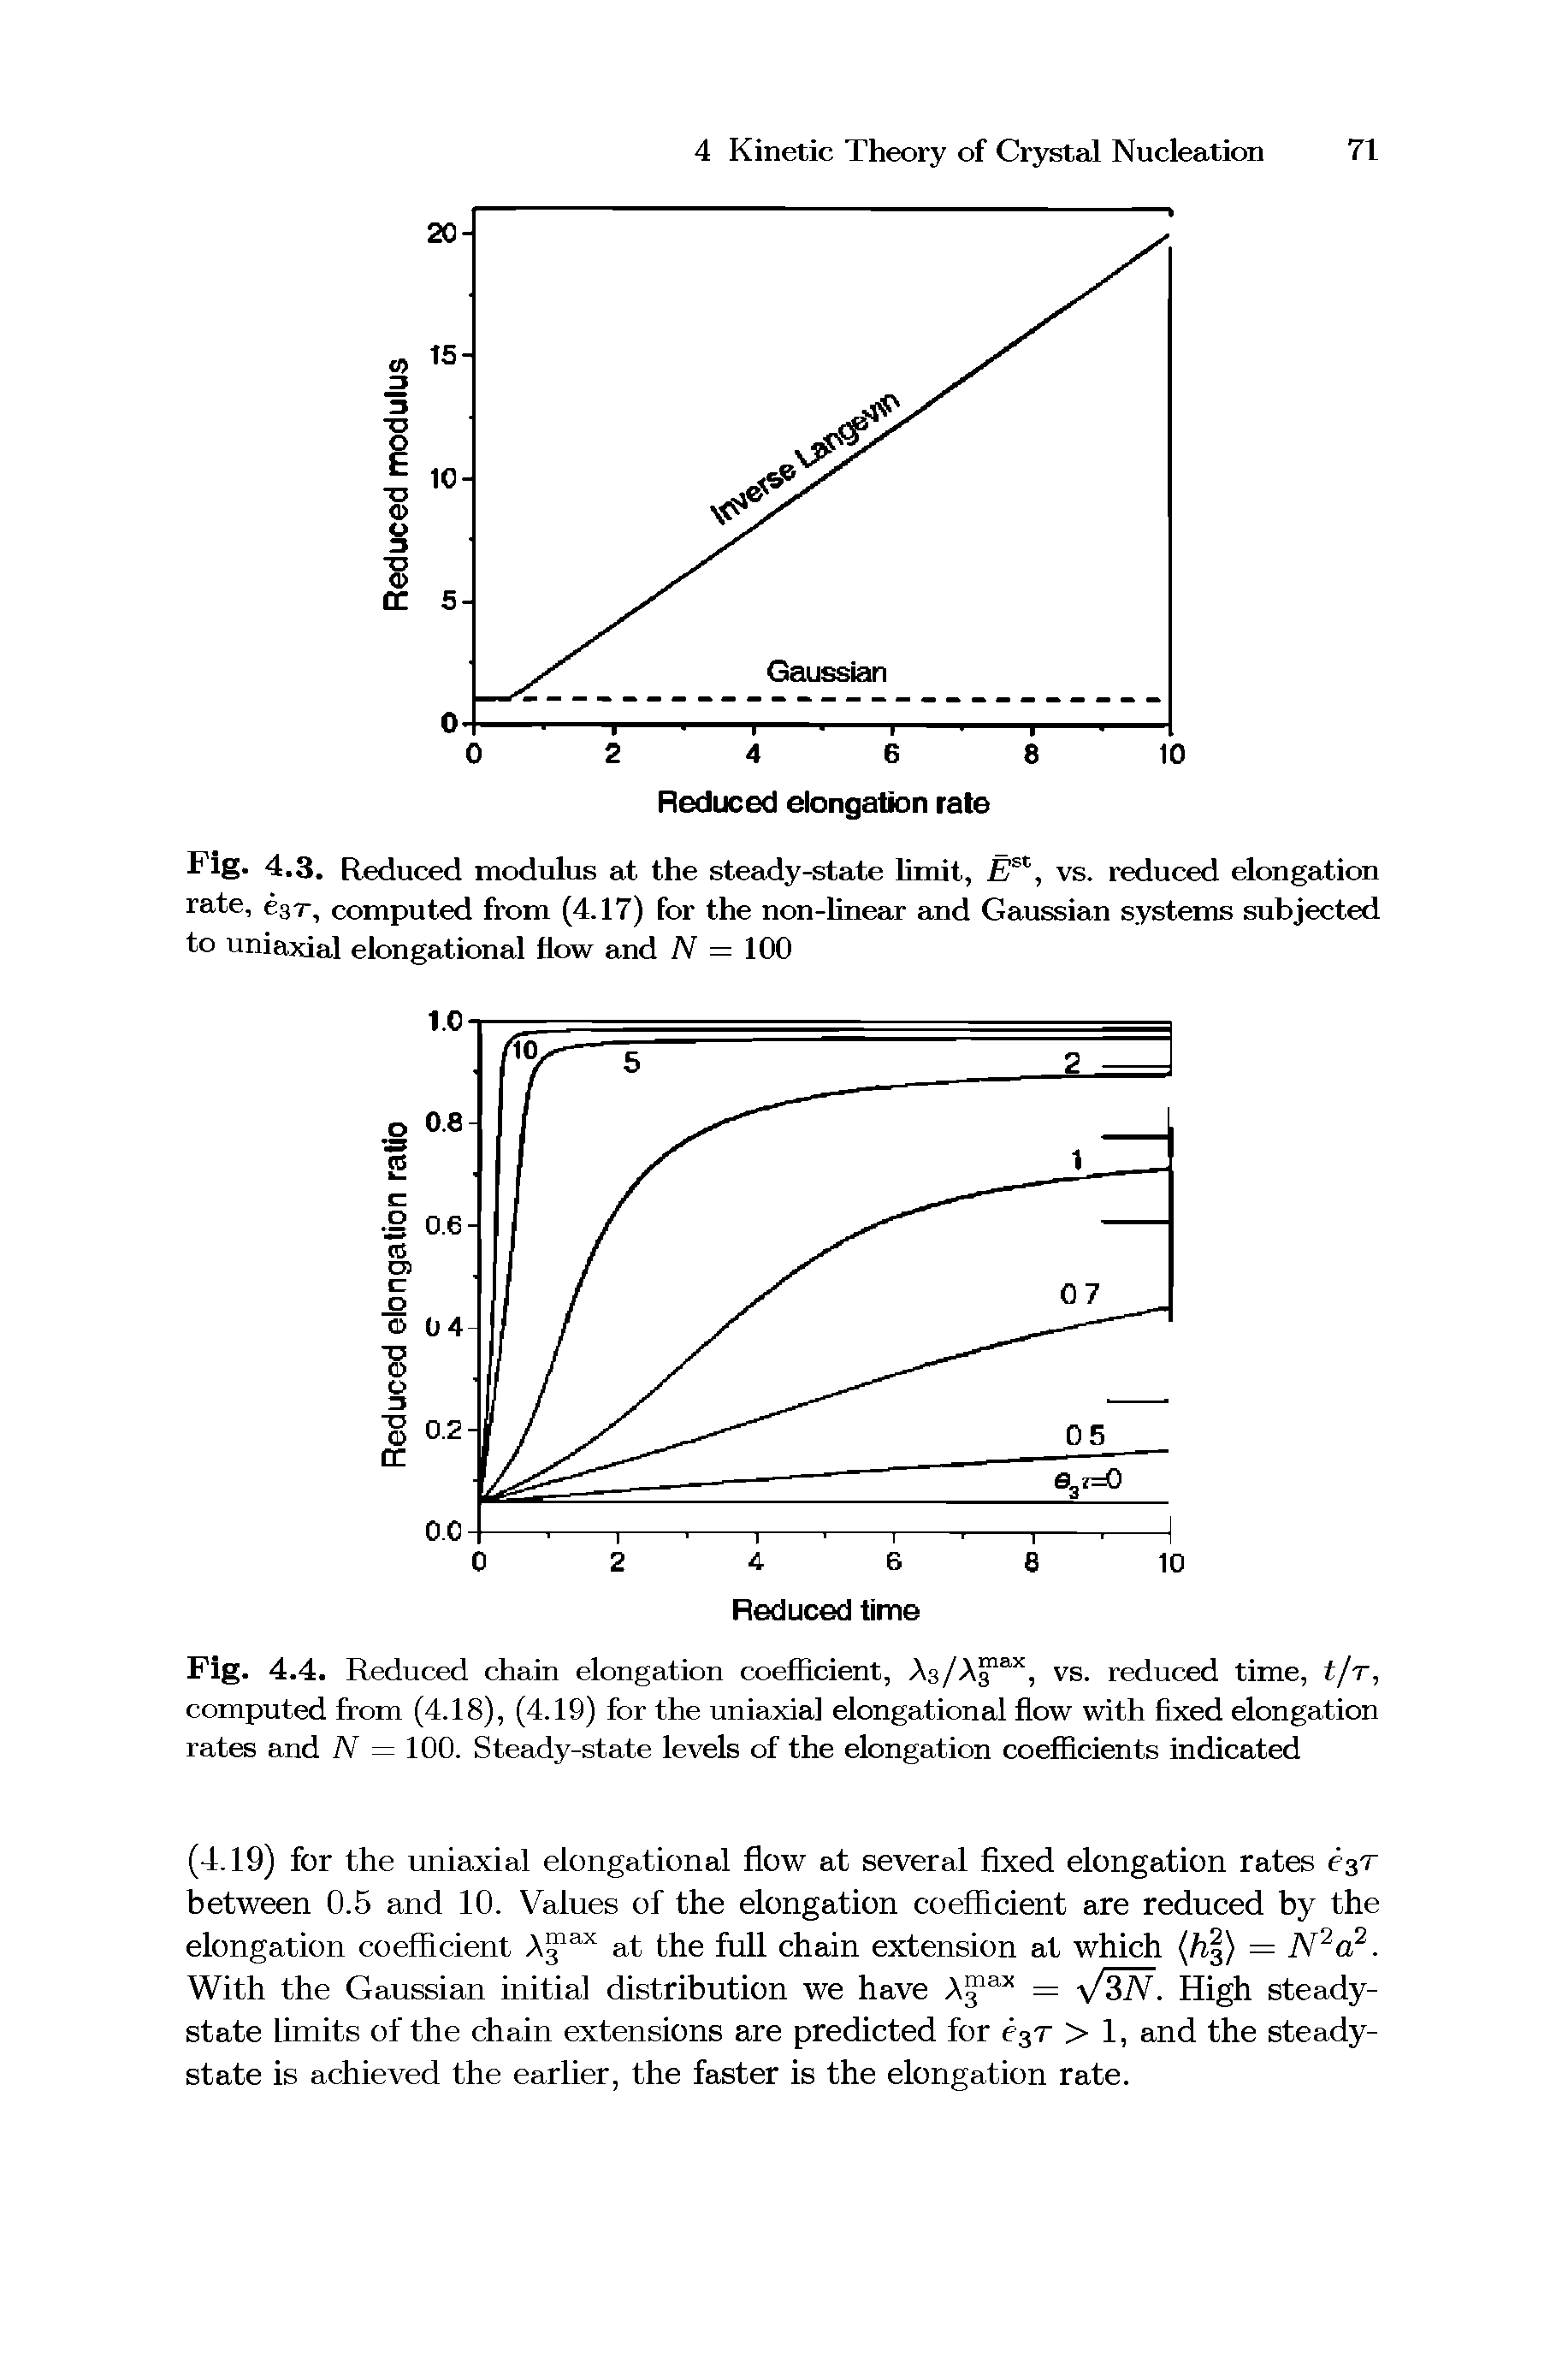 Fig. 4.3. Reduced modulus at the steady-state limit, vs. reduced elongation rate, ear, computed from (4.17) for the non-linear and Gaussian systems subjected to uniaxial elongational flow and N = 100...